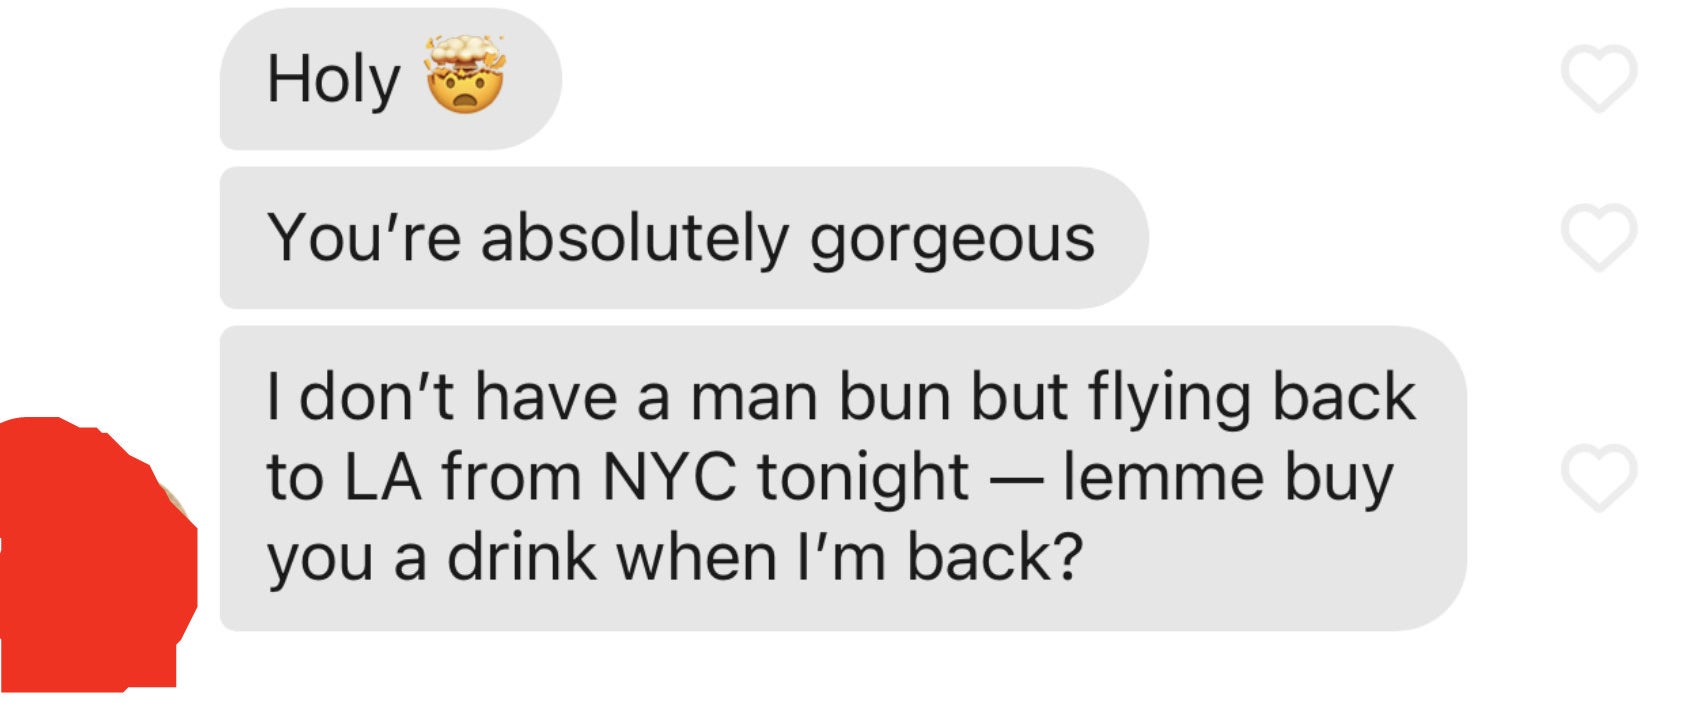 Holy [mind blown emoji] You&#x27;re absolutely gorgeous I don&#x27;t have a man bun but flying back to LA from NYC tonight- lemme buy you a drink when I&#x27;m back?